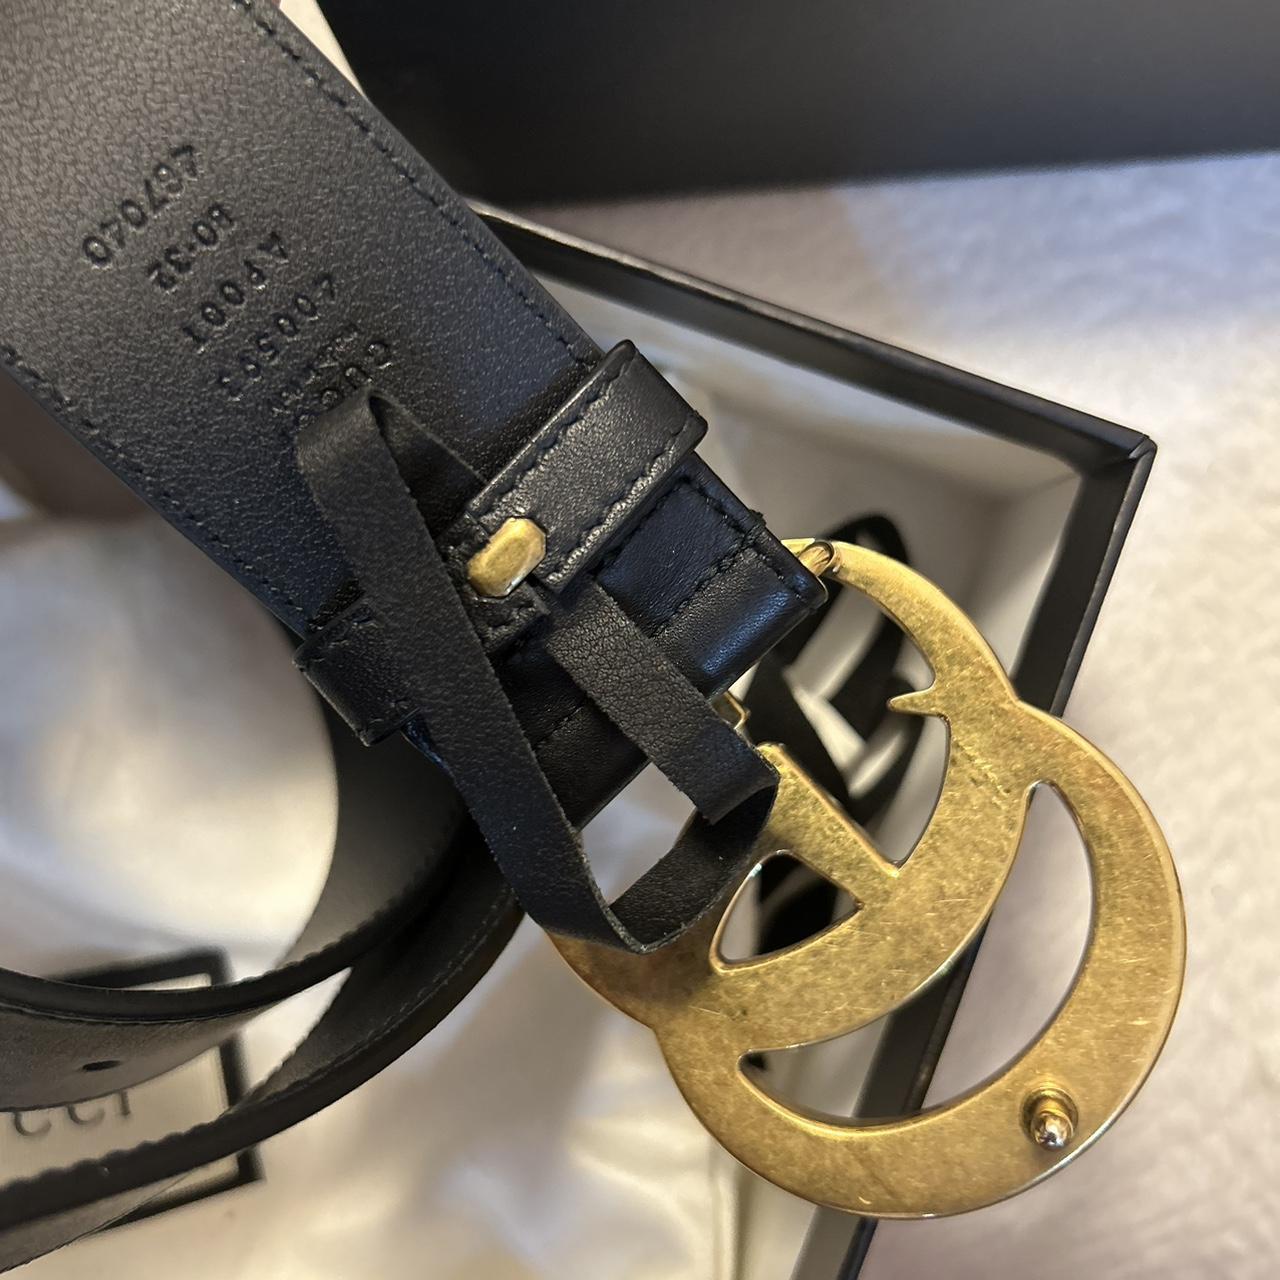 Authentic Gucci belt Will ship out as soon as... - Depop